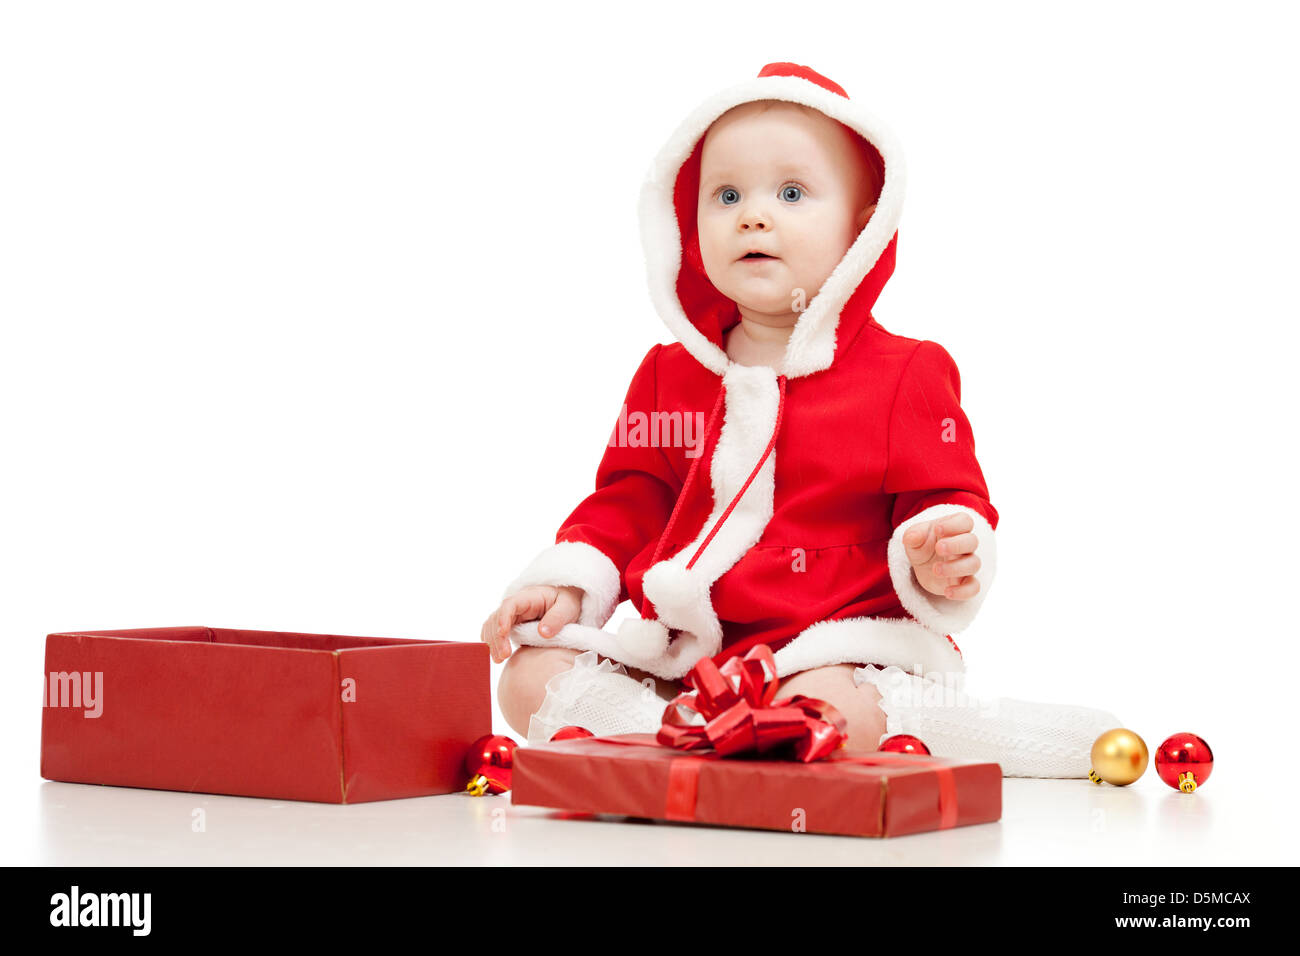 Santa Claus baby with gift box isolated on white background Stock Photo